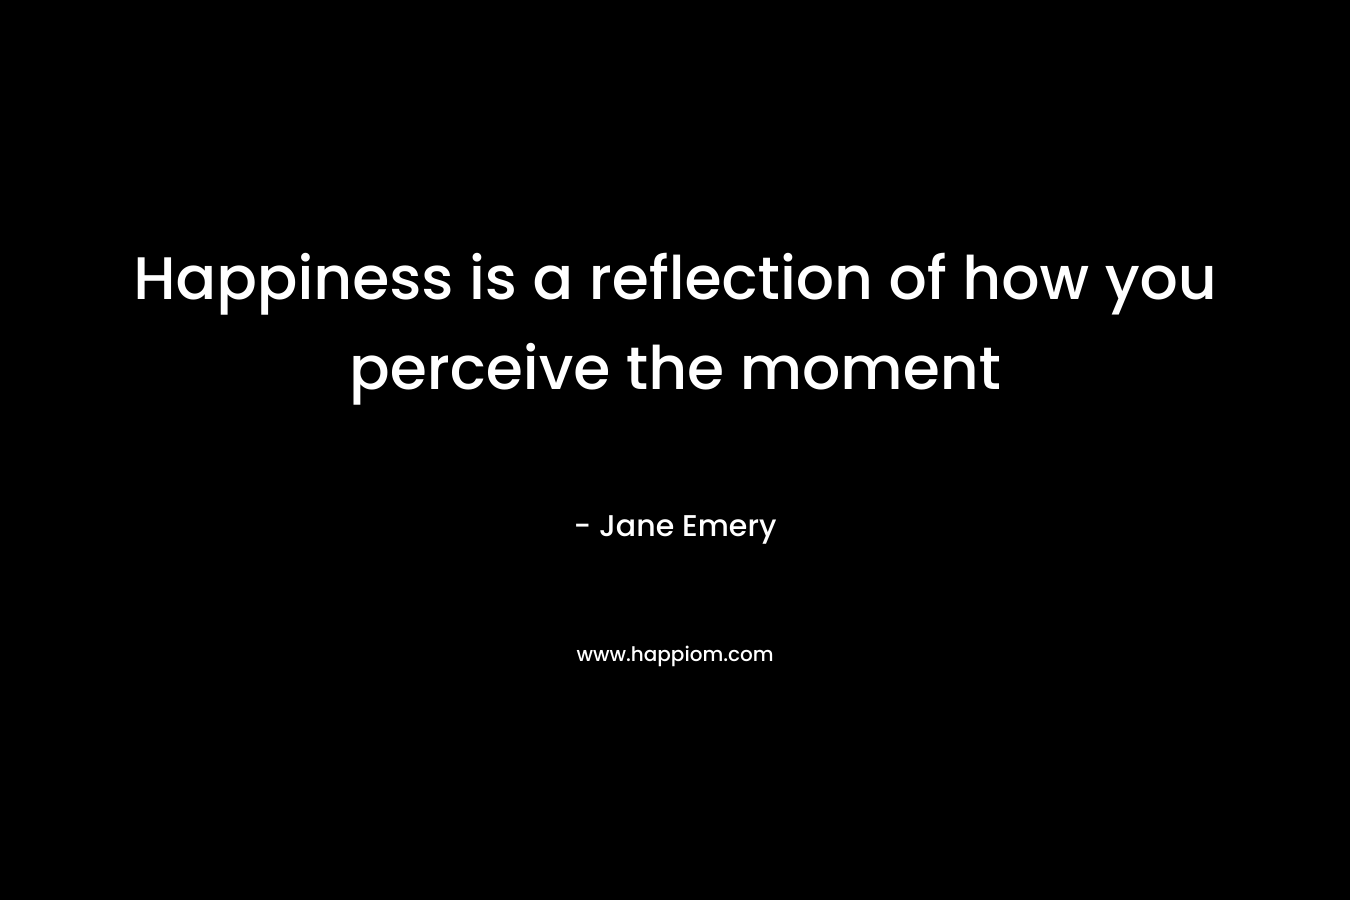 Happiness is a reflection of how you perceive the moment – Jane Emery